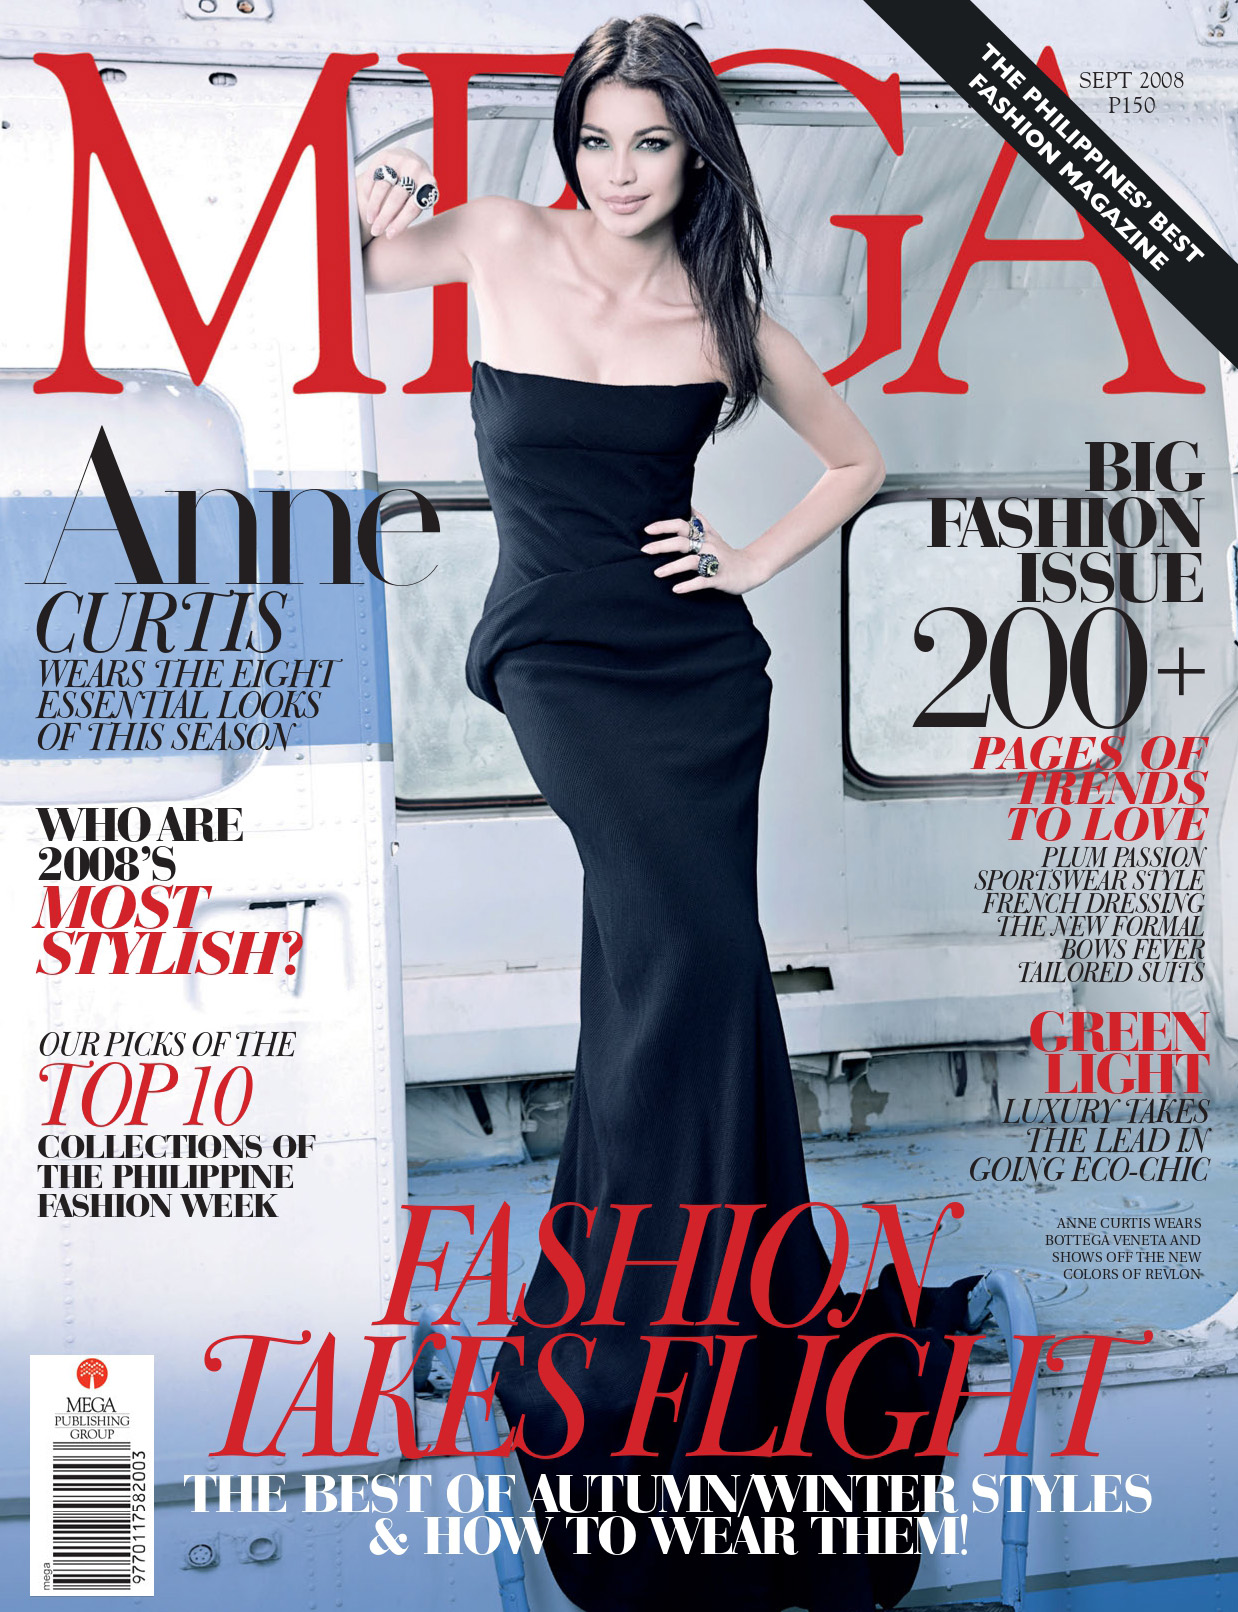 Anne Curtis-Smith brings sultry sophistication to life on MEGA's September 2008 cover